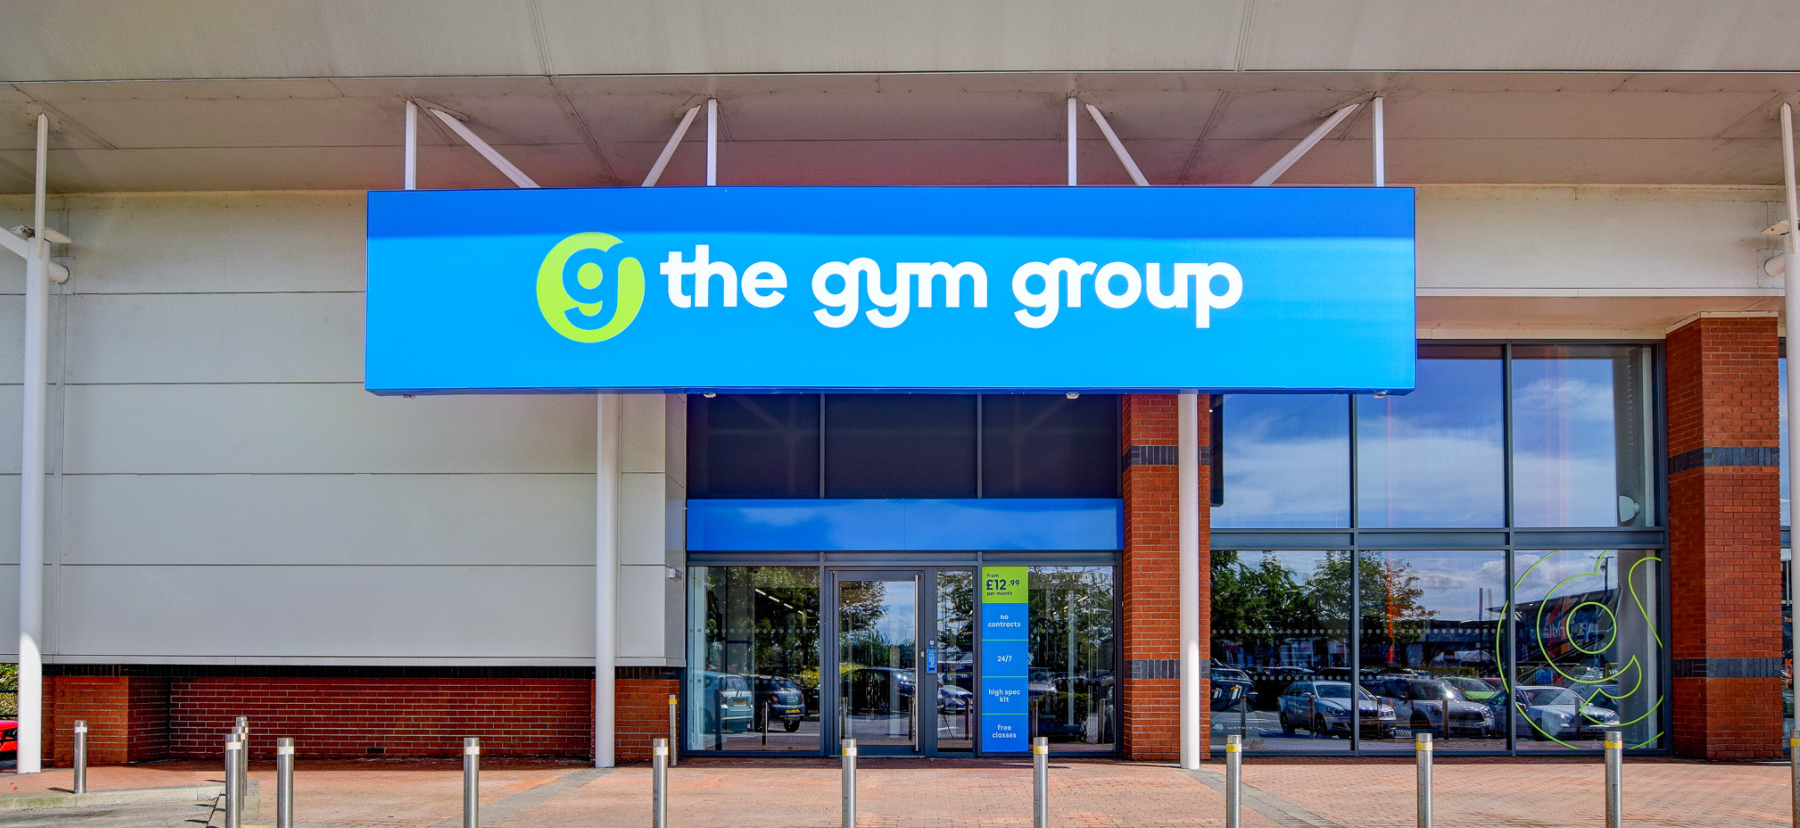 The Gym Group's 15 years of delivering affordable fitness